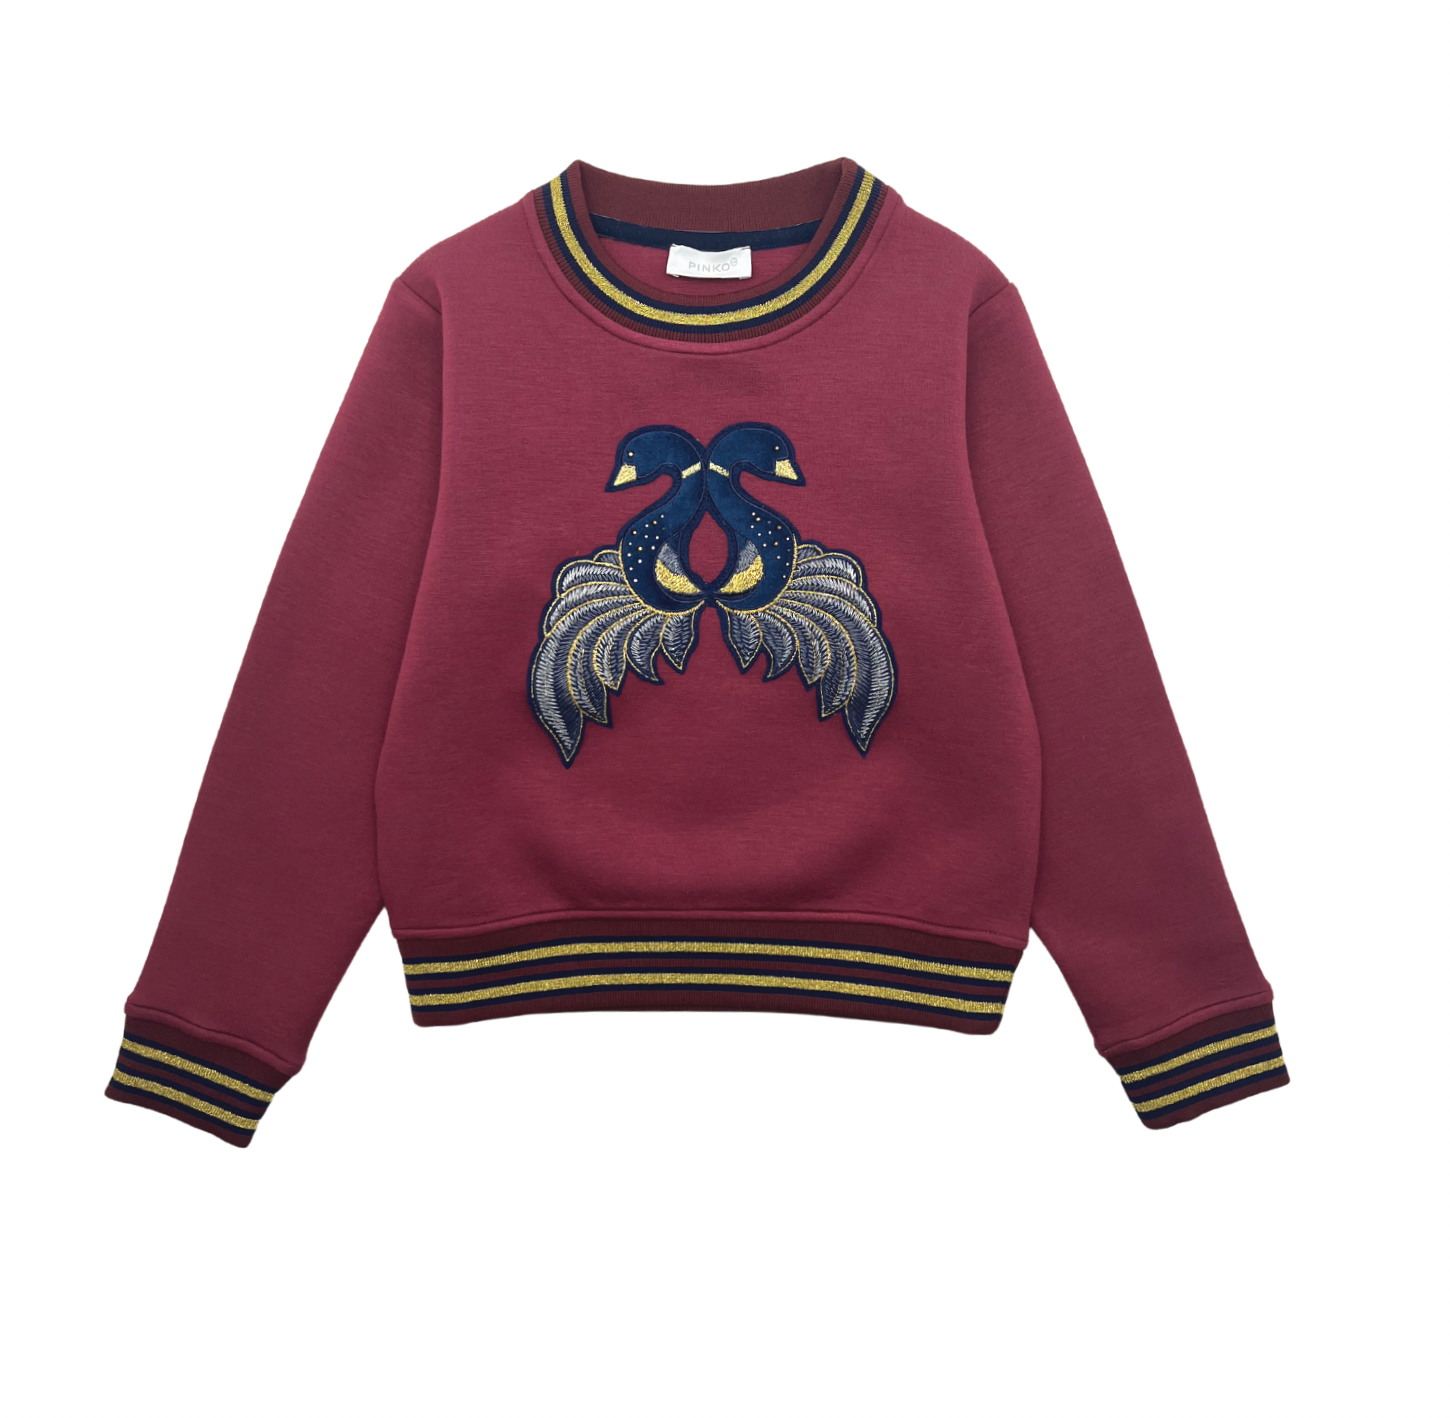 PINKO - Ultra soft burgundy sweatshirt with sign inserts - 8 years old